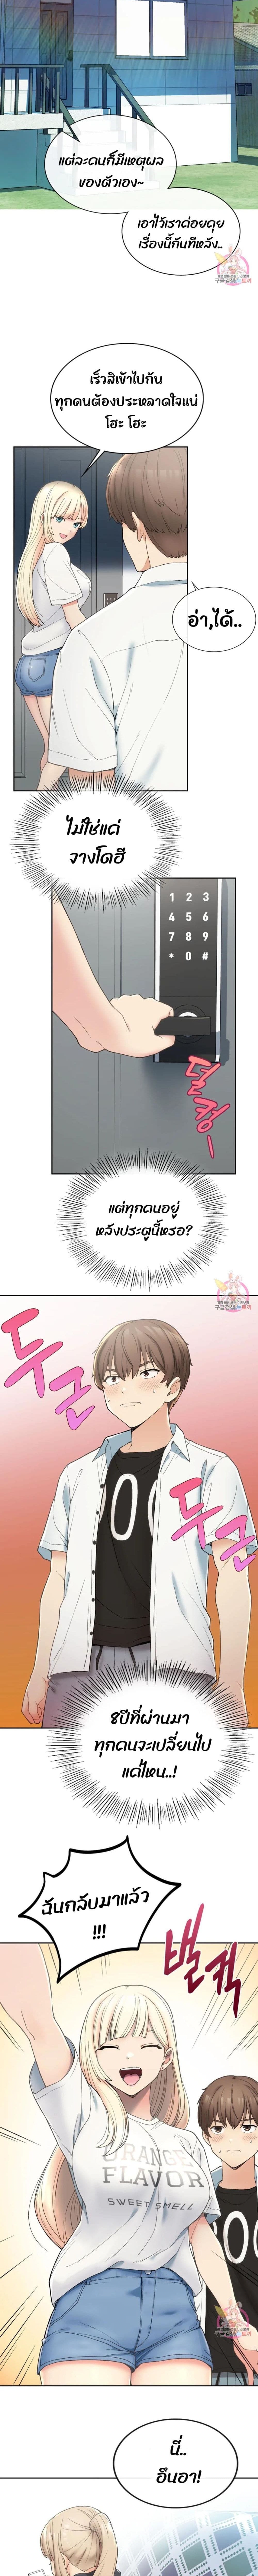 Shall We Live Together in the Country ตอนที่ 1 ภาพ 20